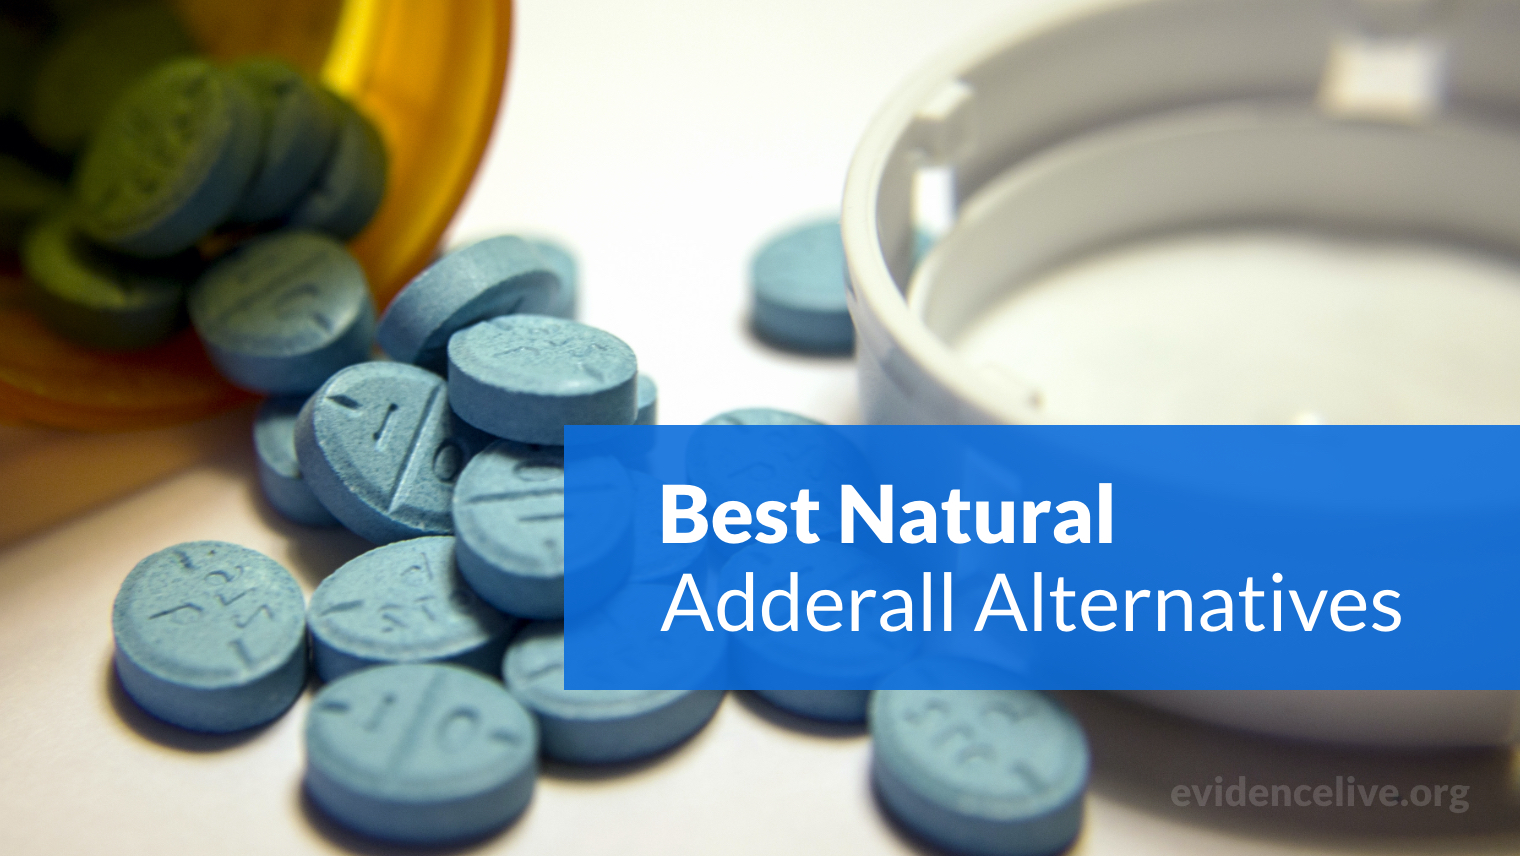 Best Natural Adderall Alternatives Over The Counter